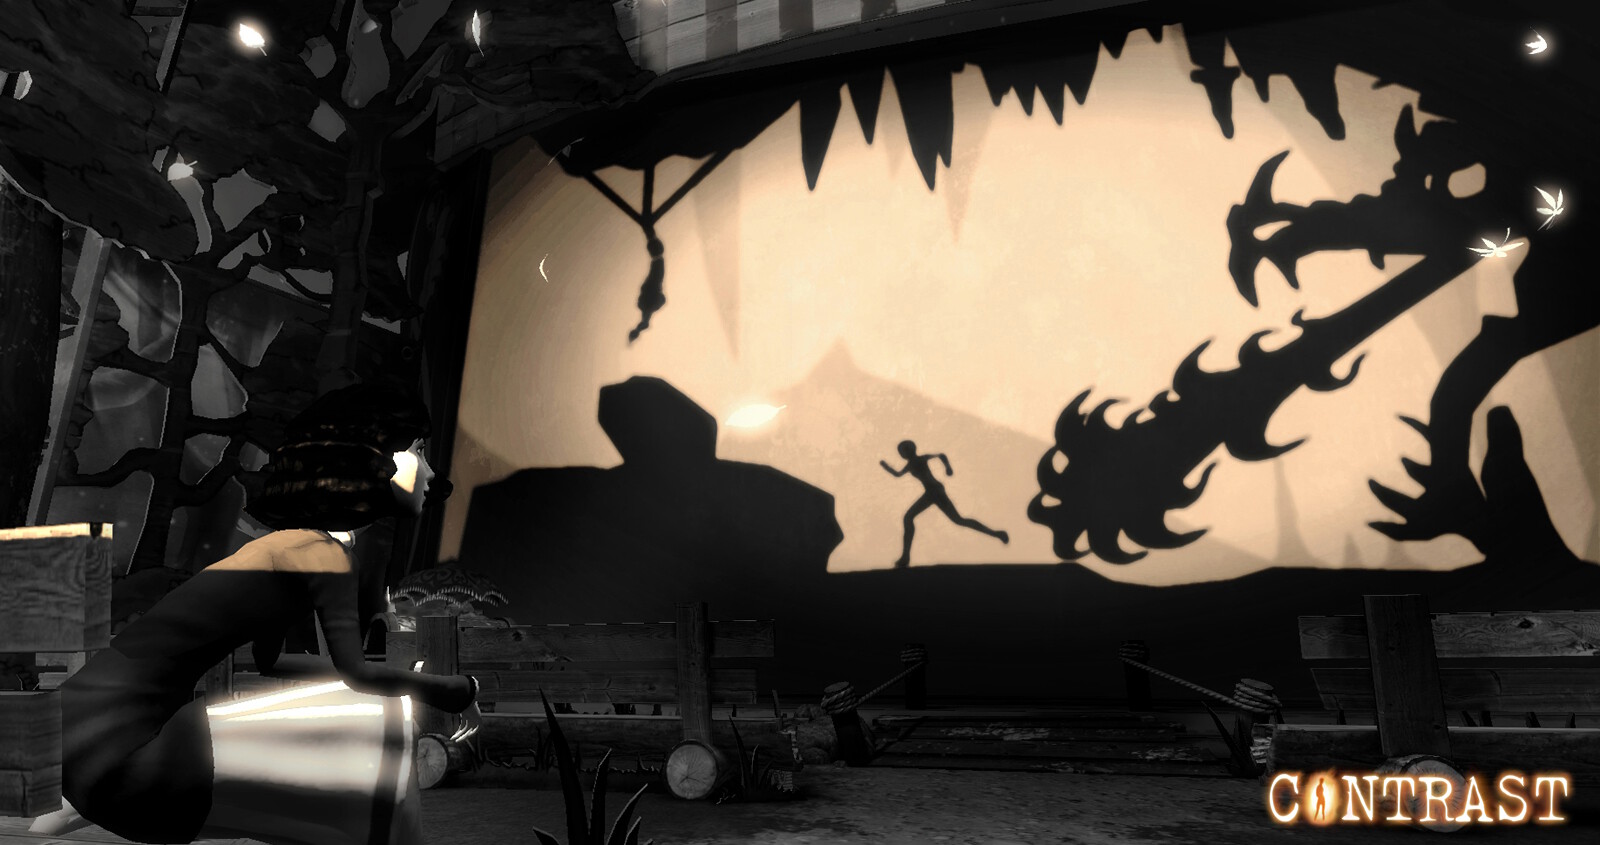 More Deliciously Noir Screenshots For Contrast